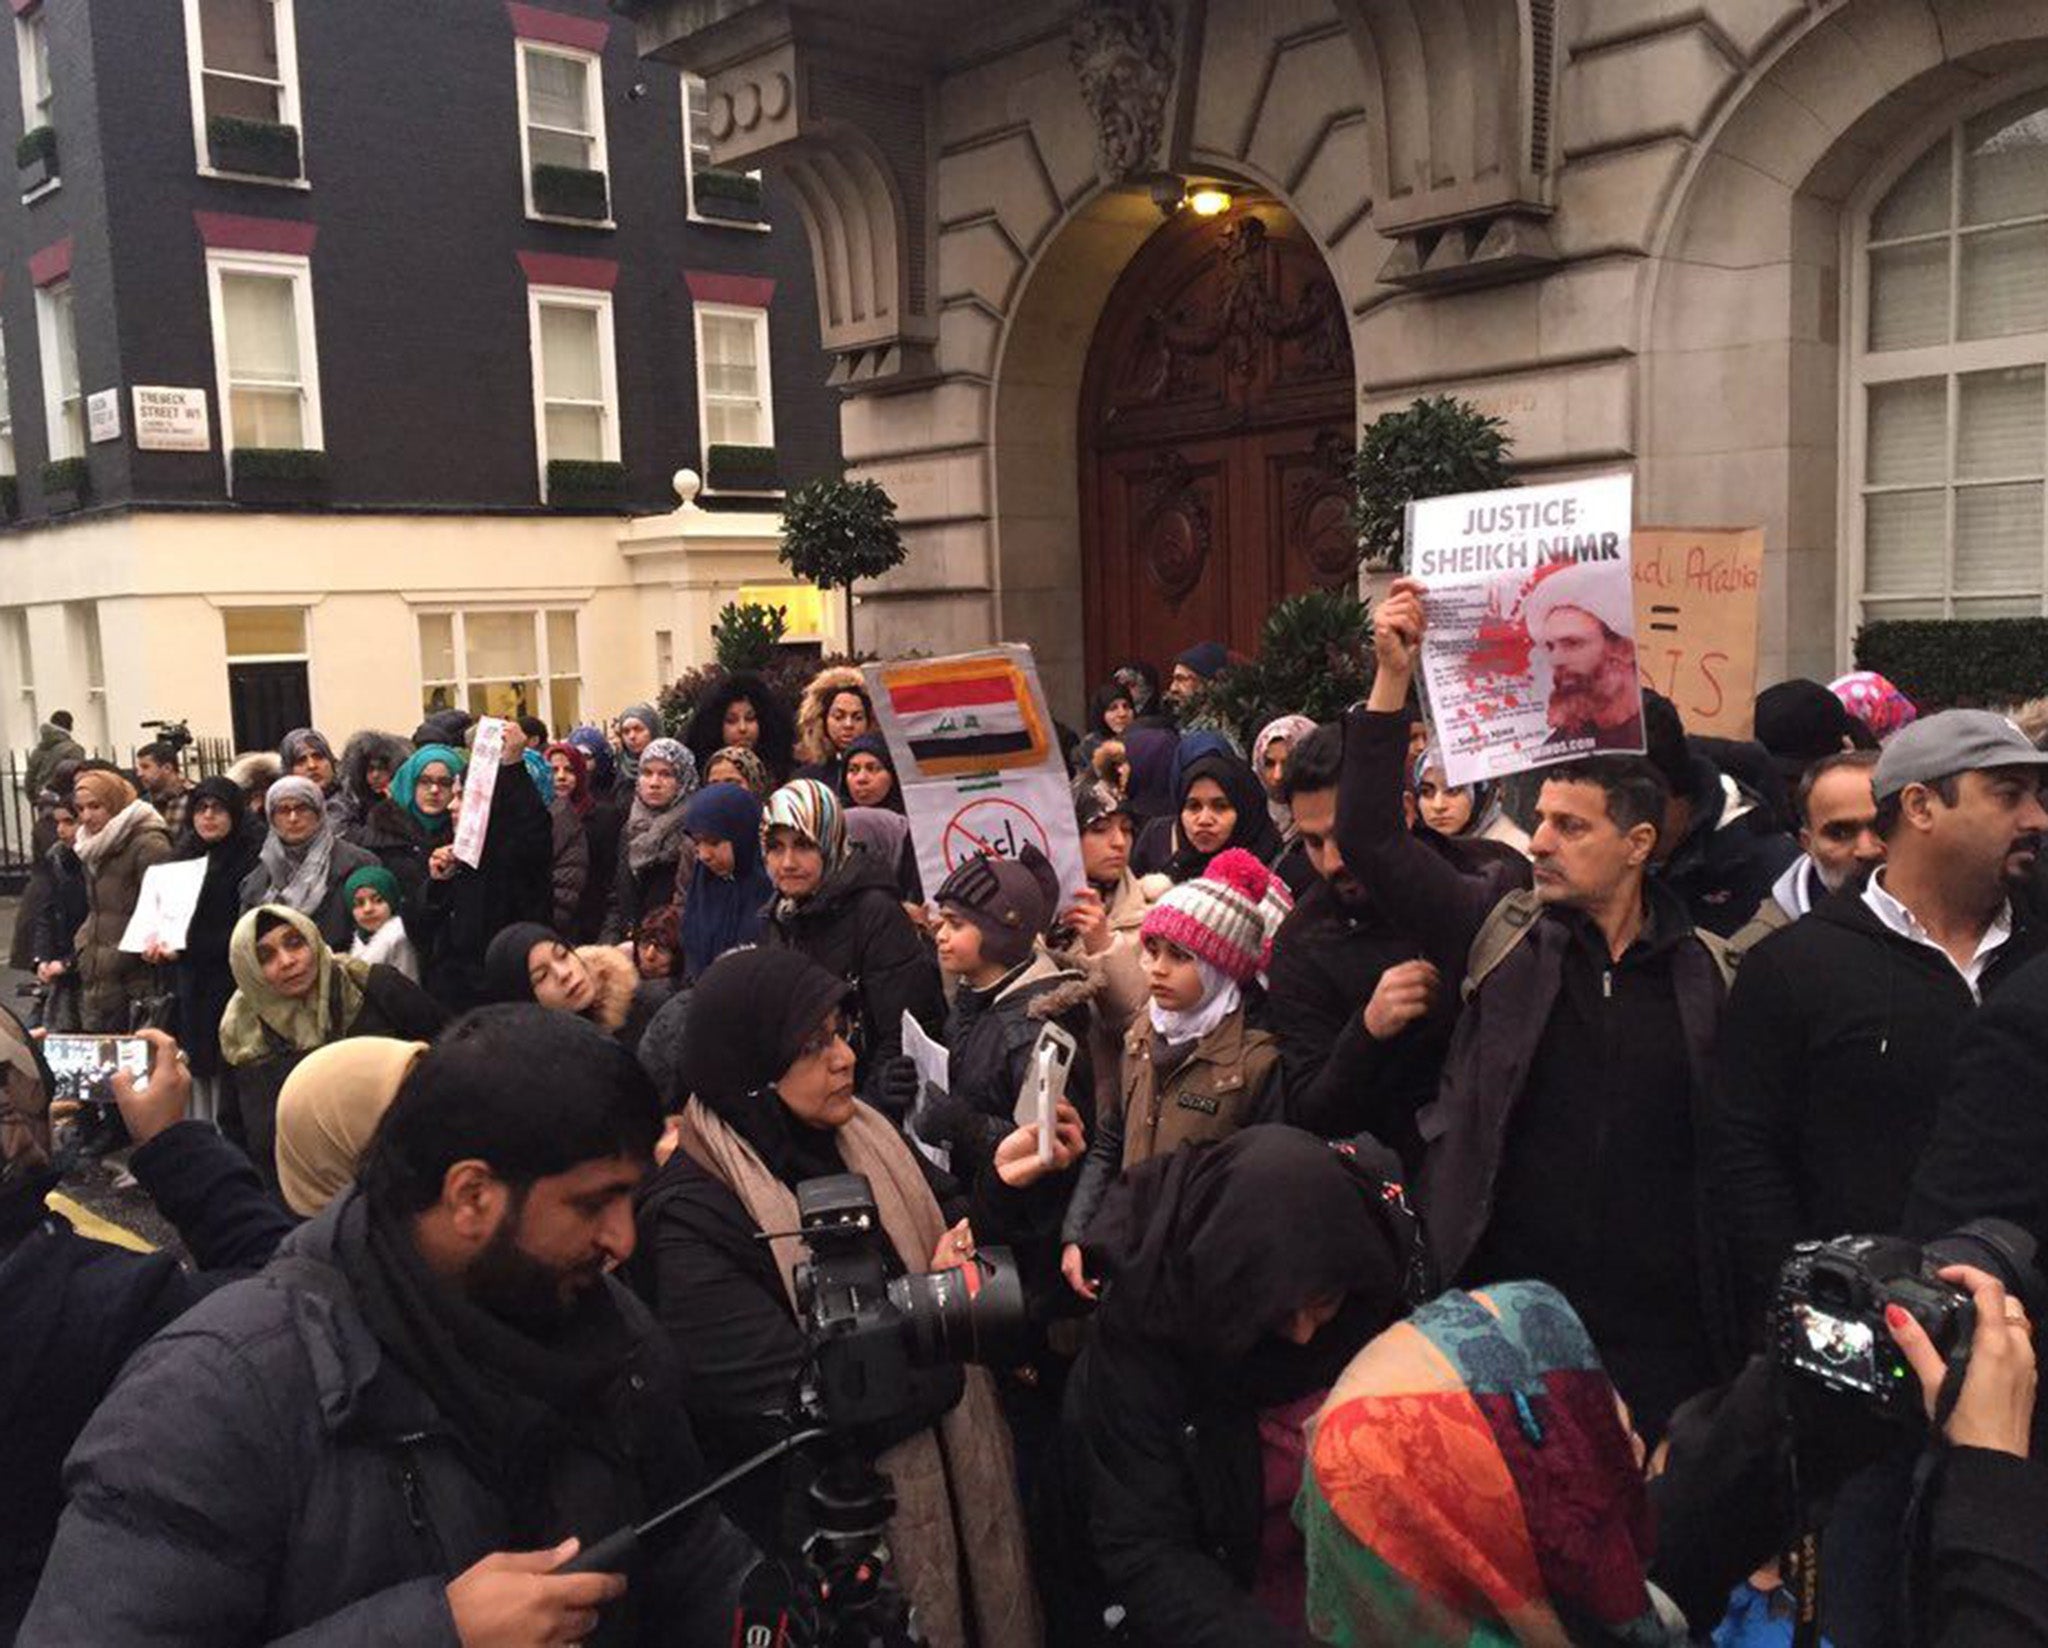 Protests have called on the UK to stop supporting the Saudi regime (Sayed Ahmed Alwadaei/Twitter)